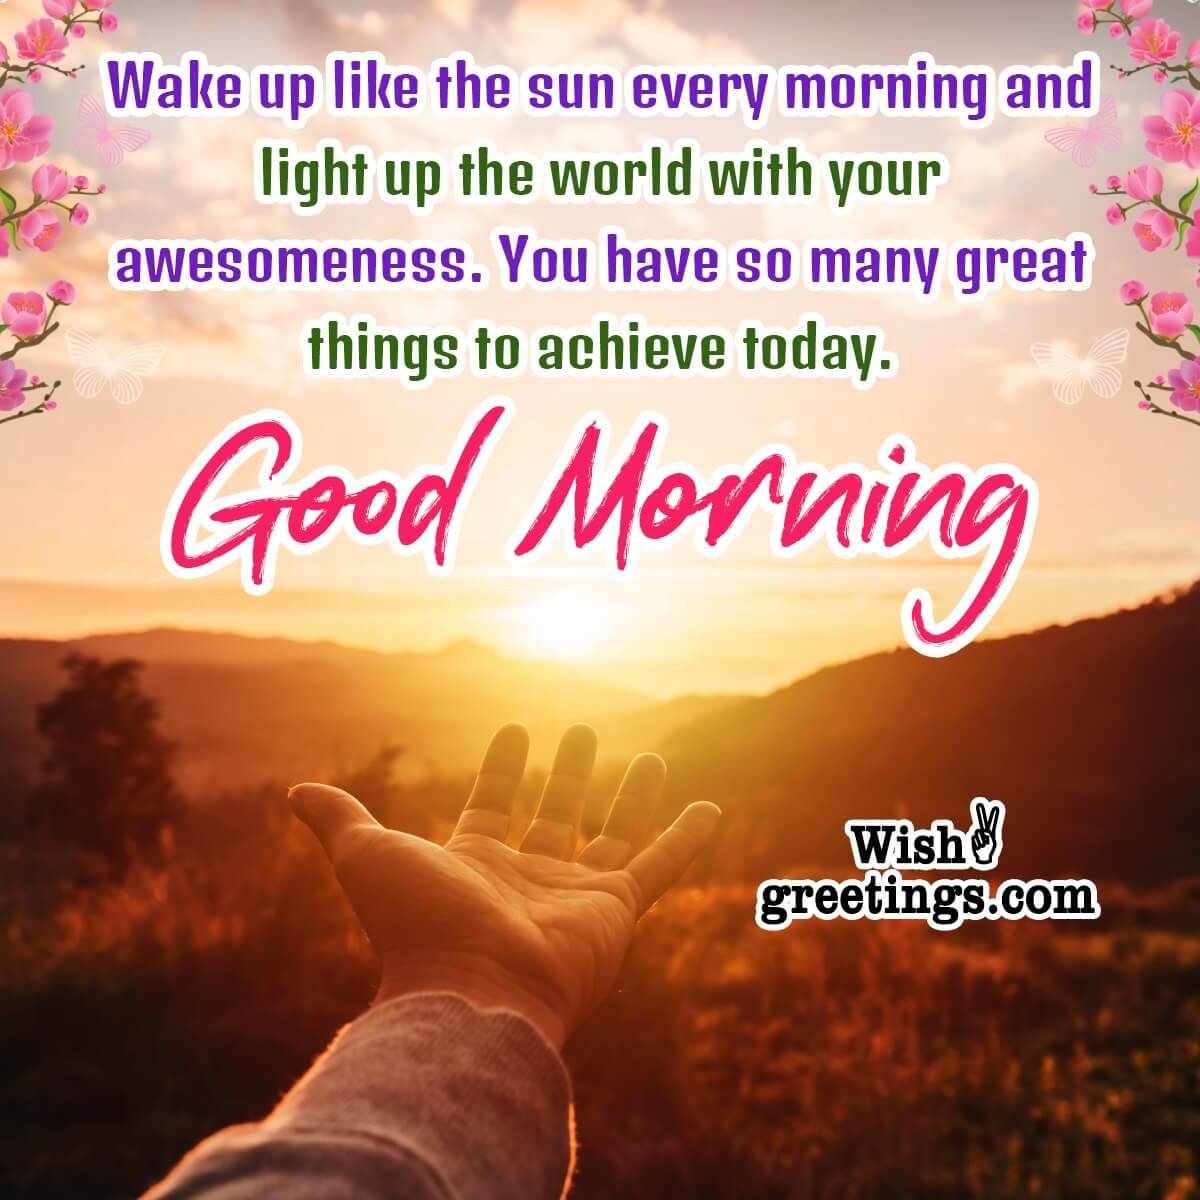 Good Morning Wishes